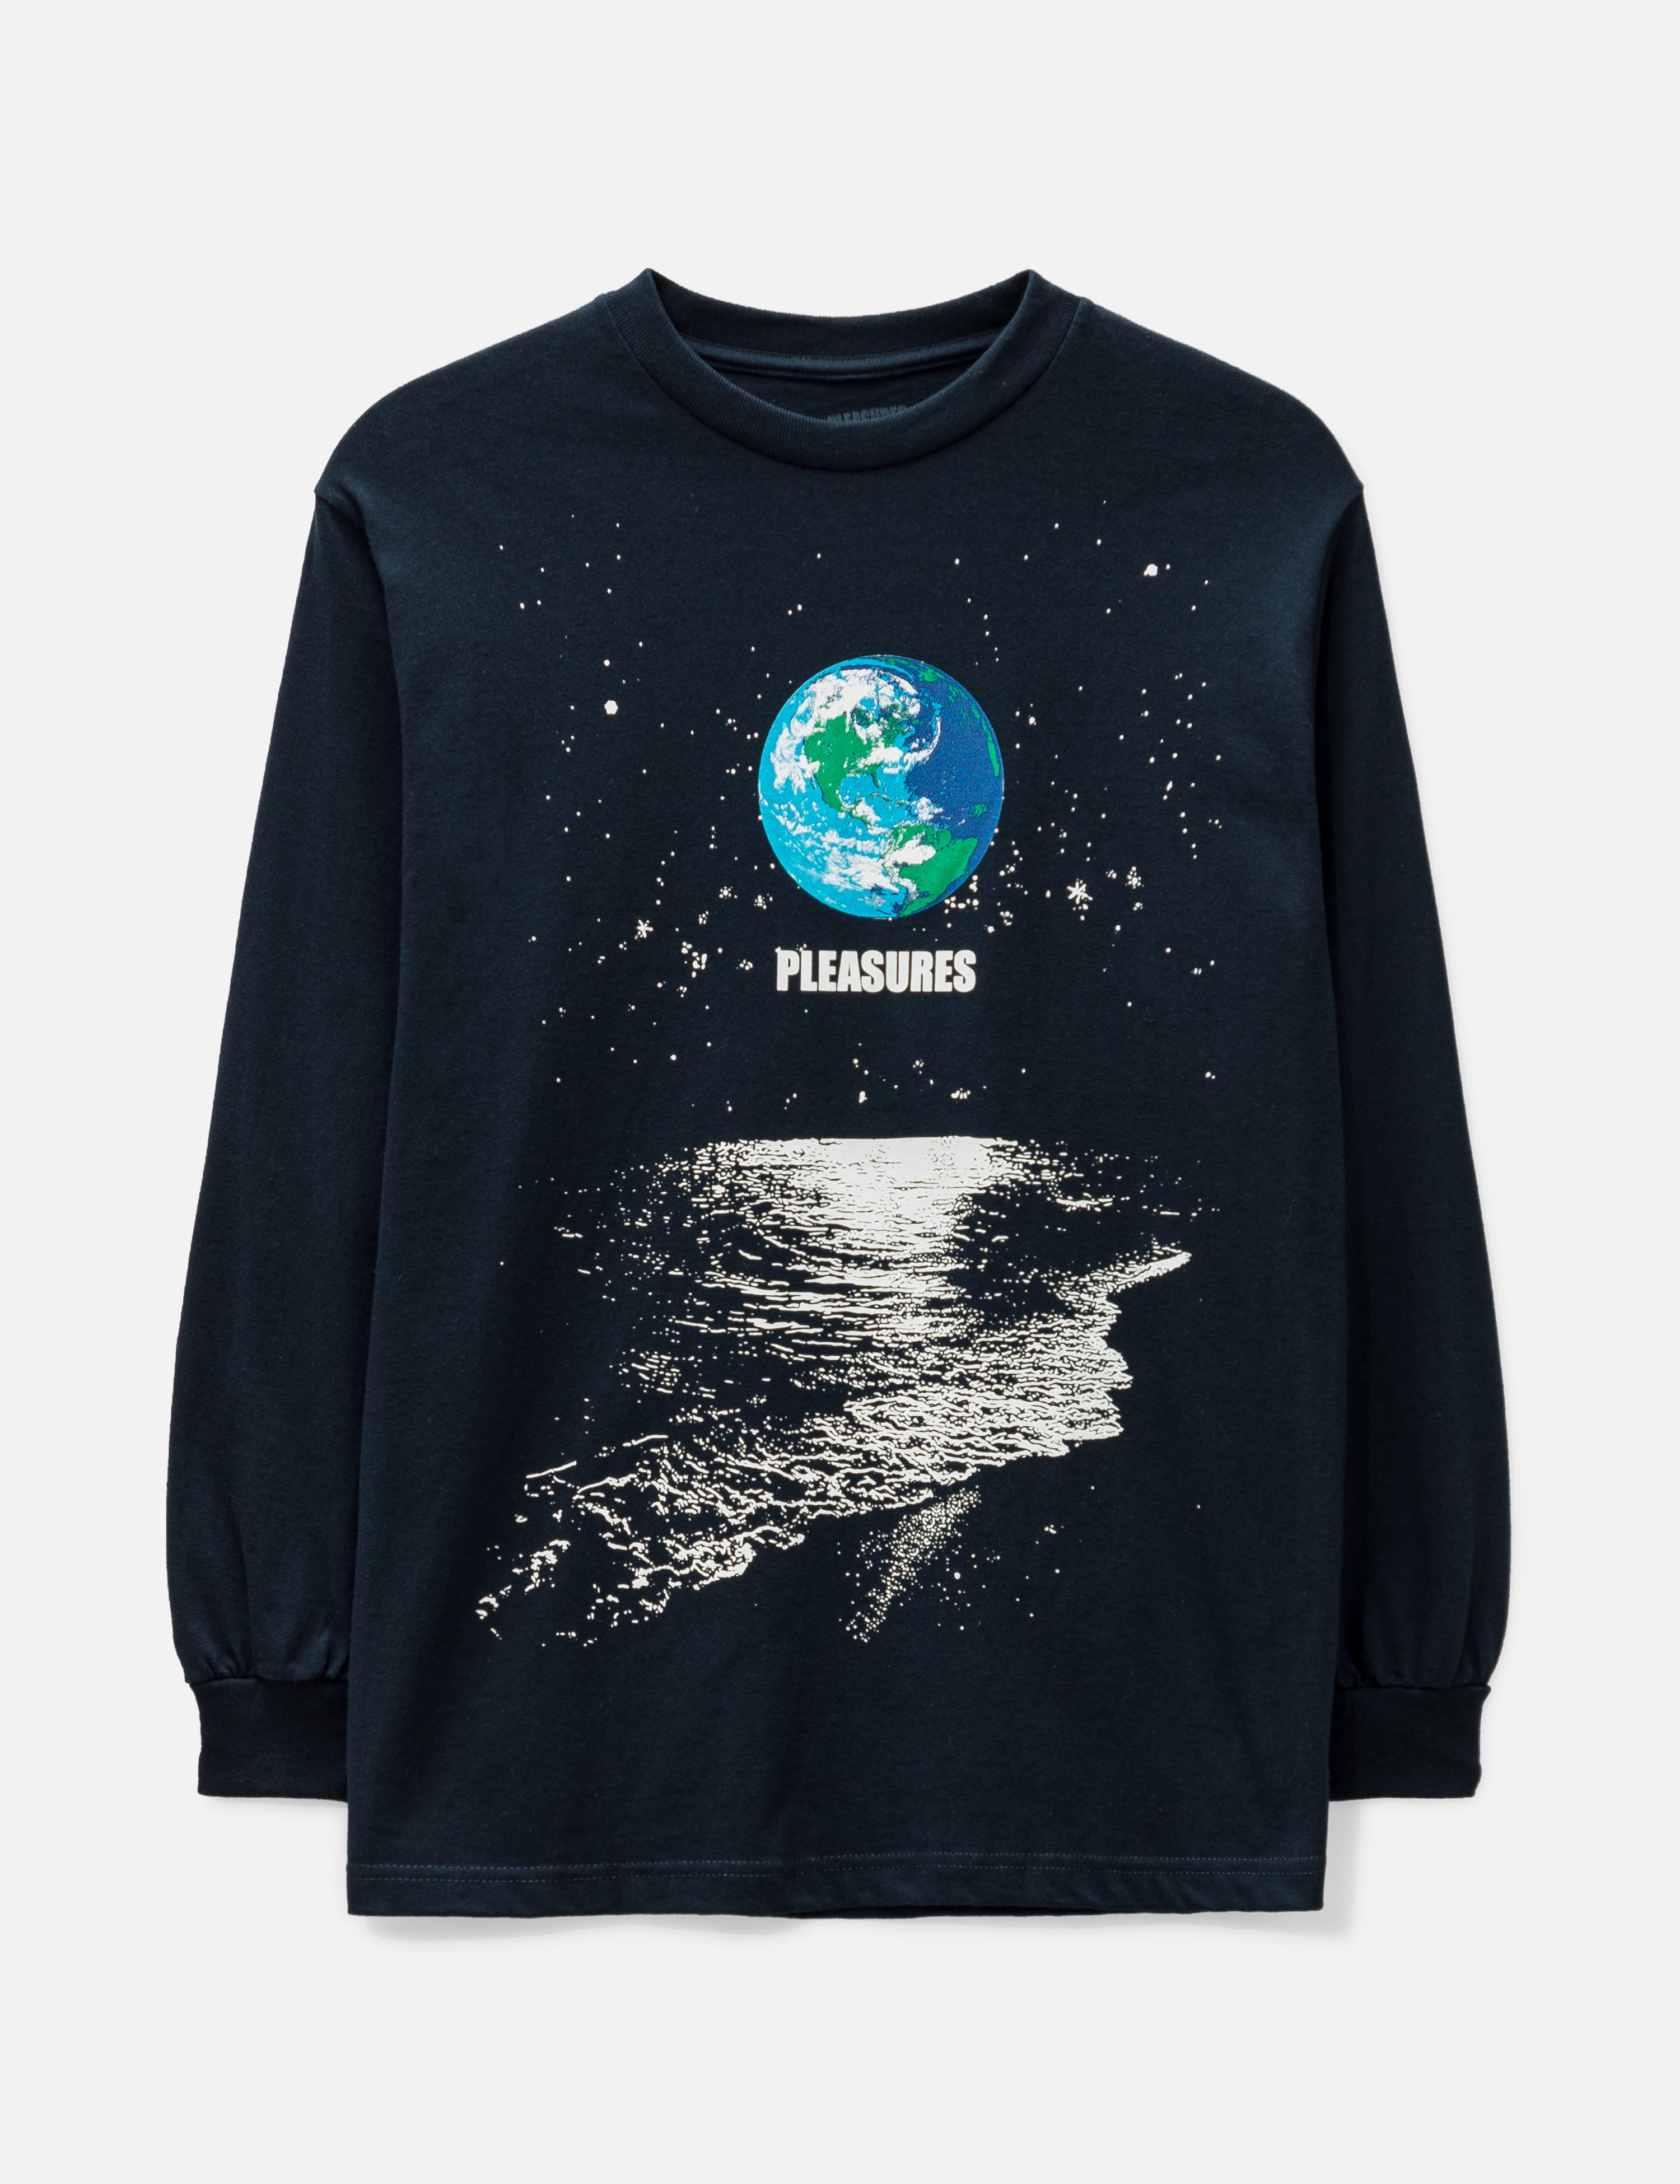 Pleasures   Rent Long Sleeve T shirt   HBX   Globally Curated